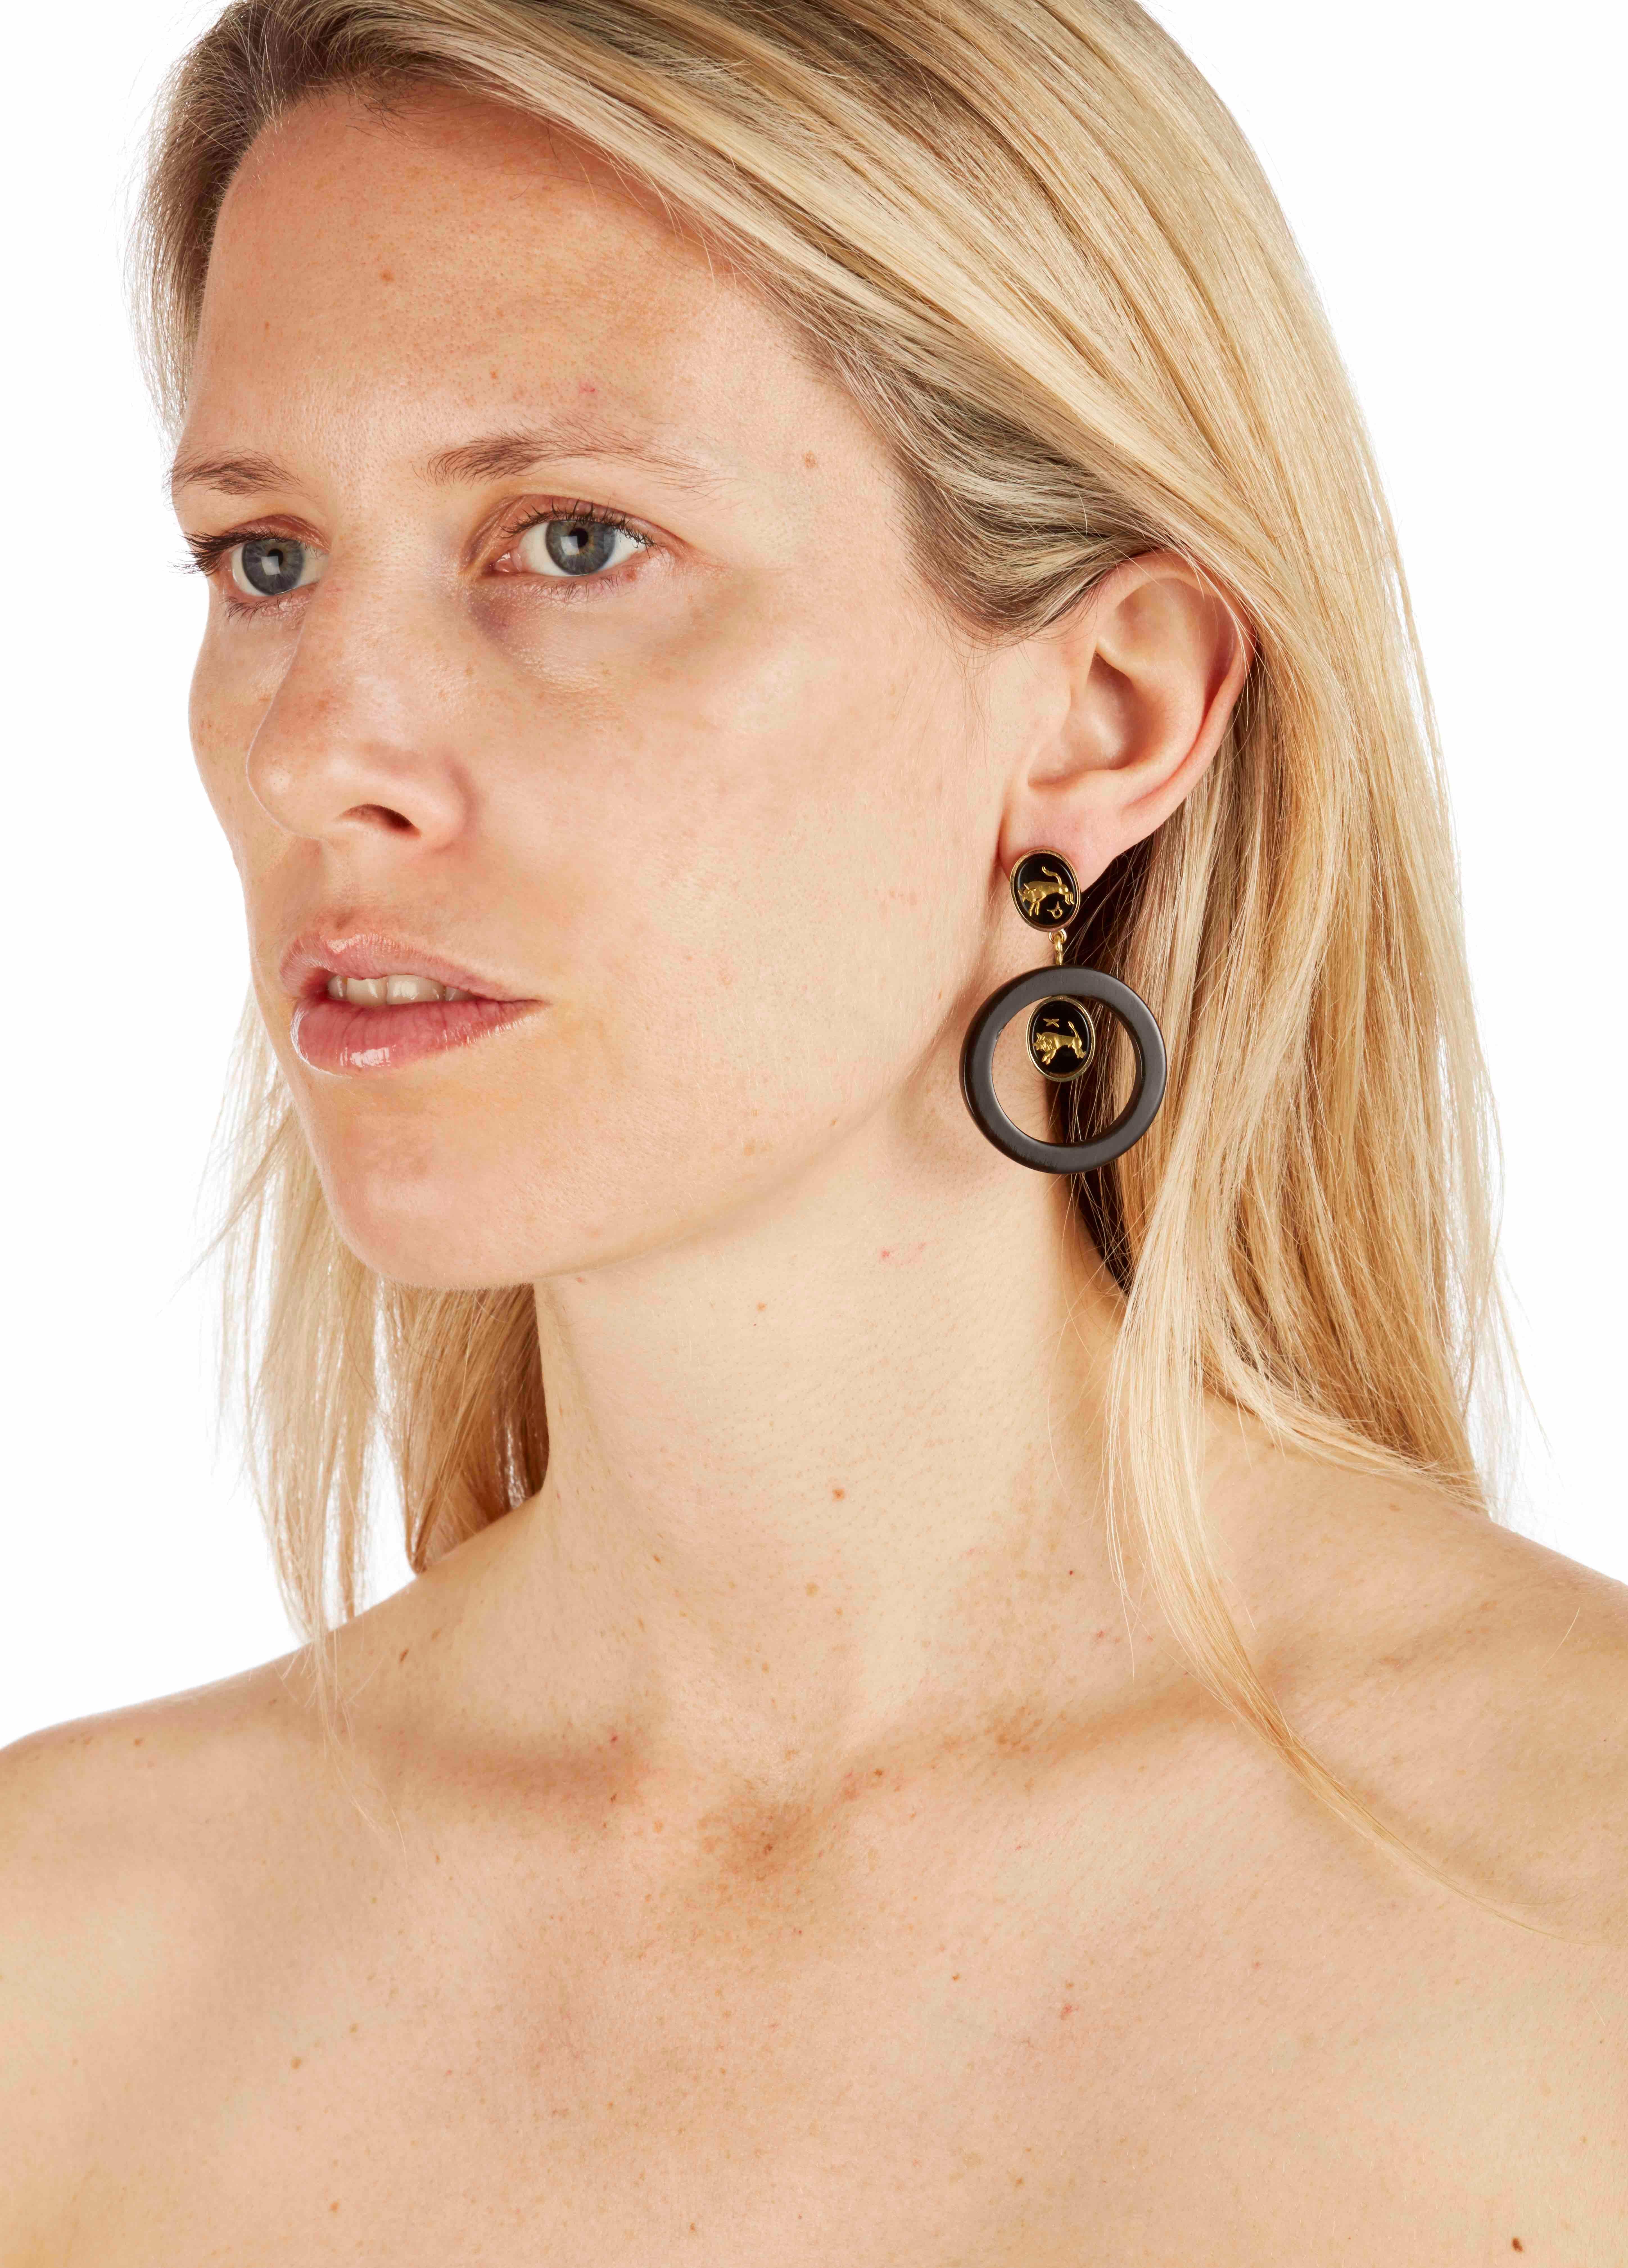 Carved onyx and African cow horn hoop earrings. 

The precious onyx stones feature engraved gold bulls reminiscent of ancient cave paintings found in the Koro Hills of East Africa. 

The cow horn is hand carved by artisans in Nairobi, Kenya and